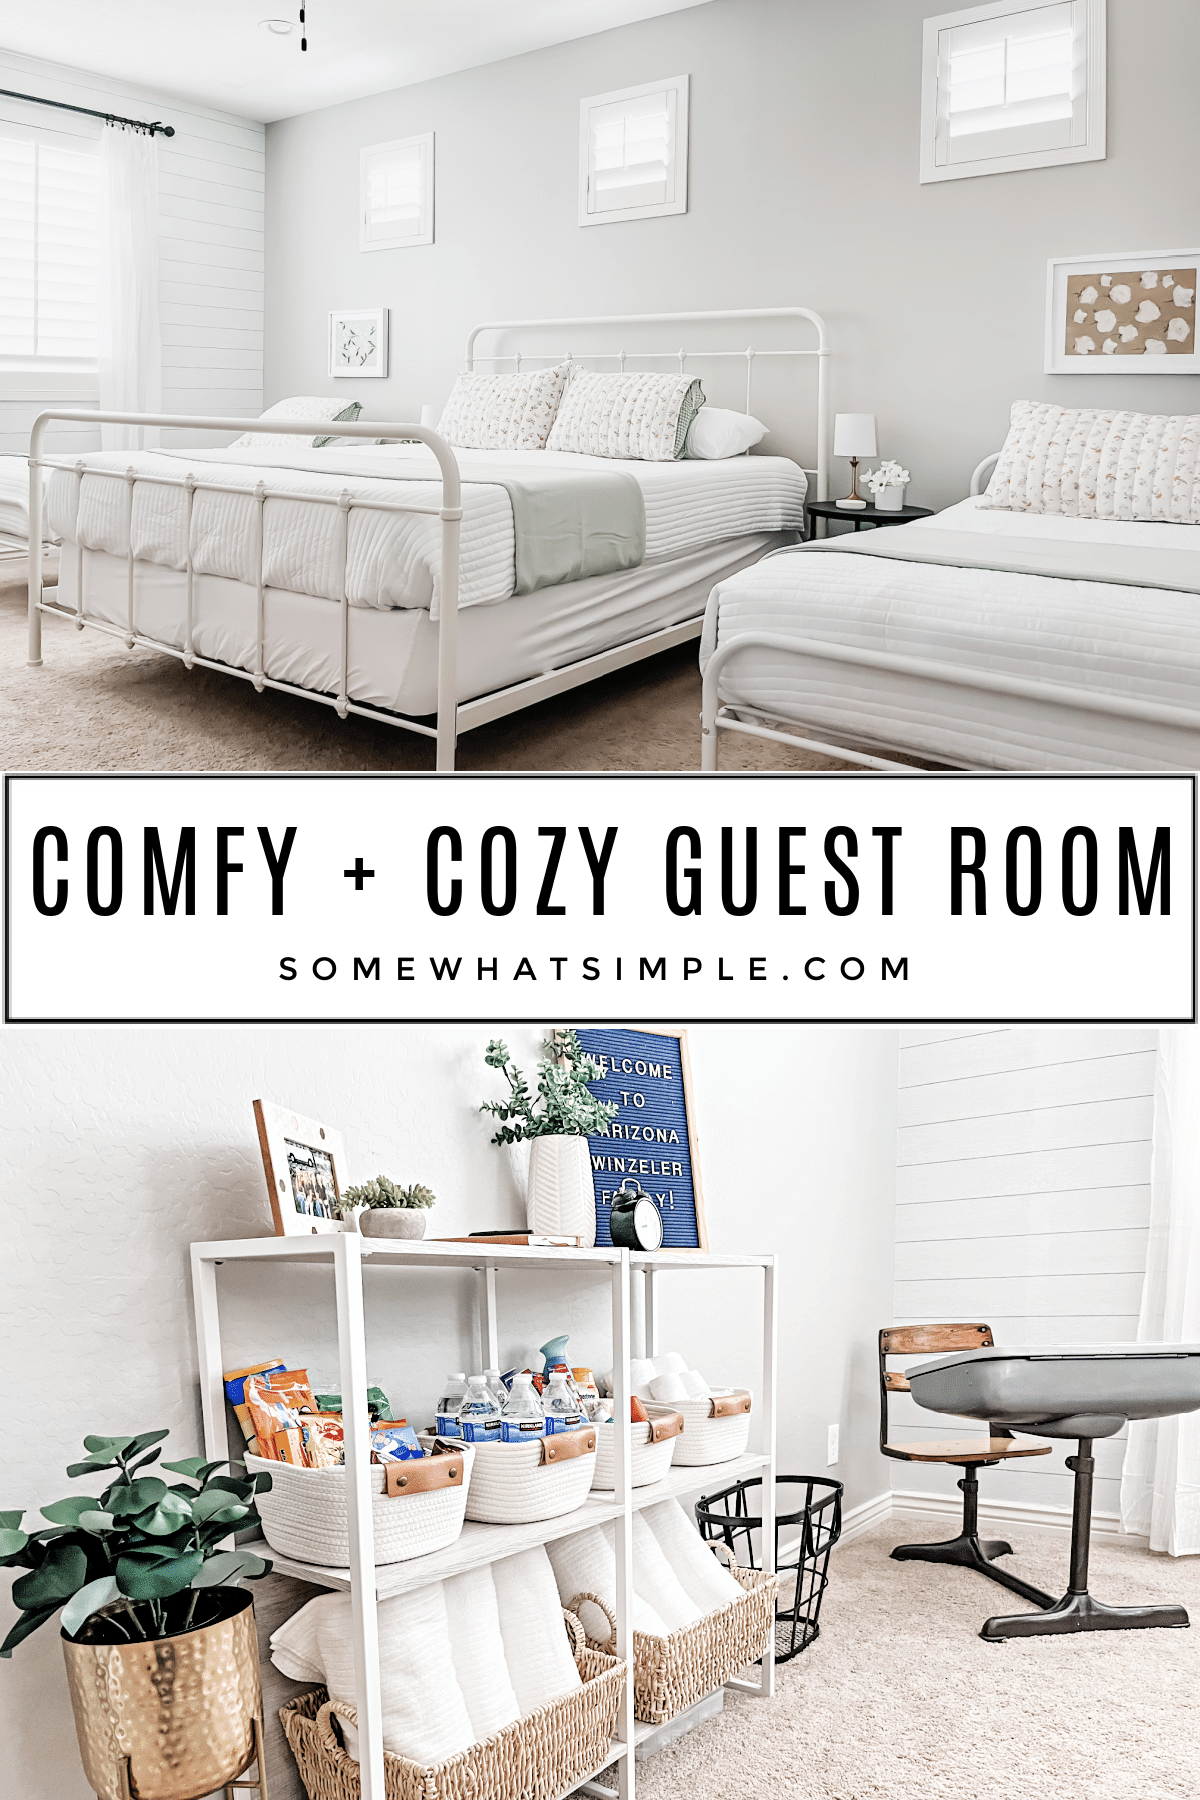 Designing a welcoming and restful guest room for friends and family doesn't have to cost a fortune! Help your guests relax and enjoy their visit without breaking the bank! via @somewhatsimple